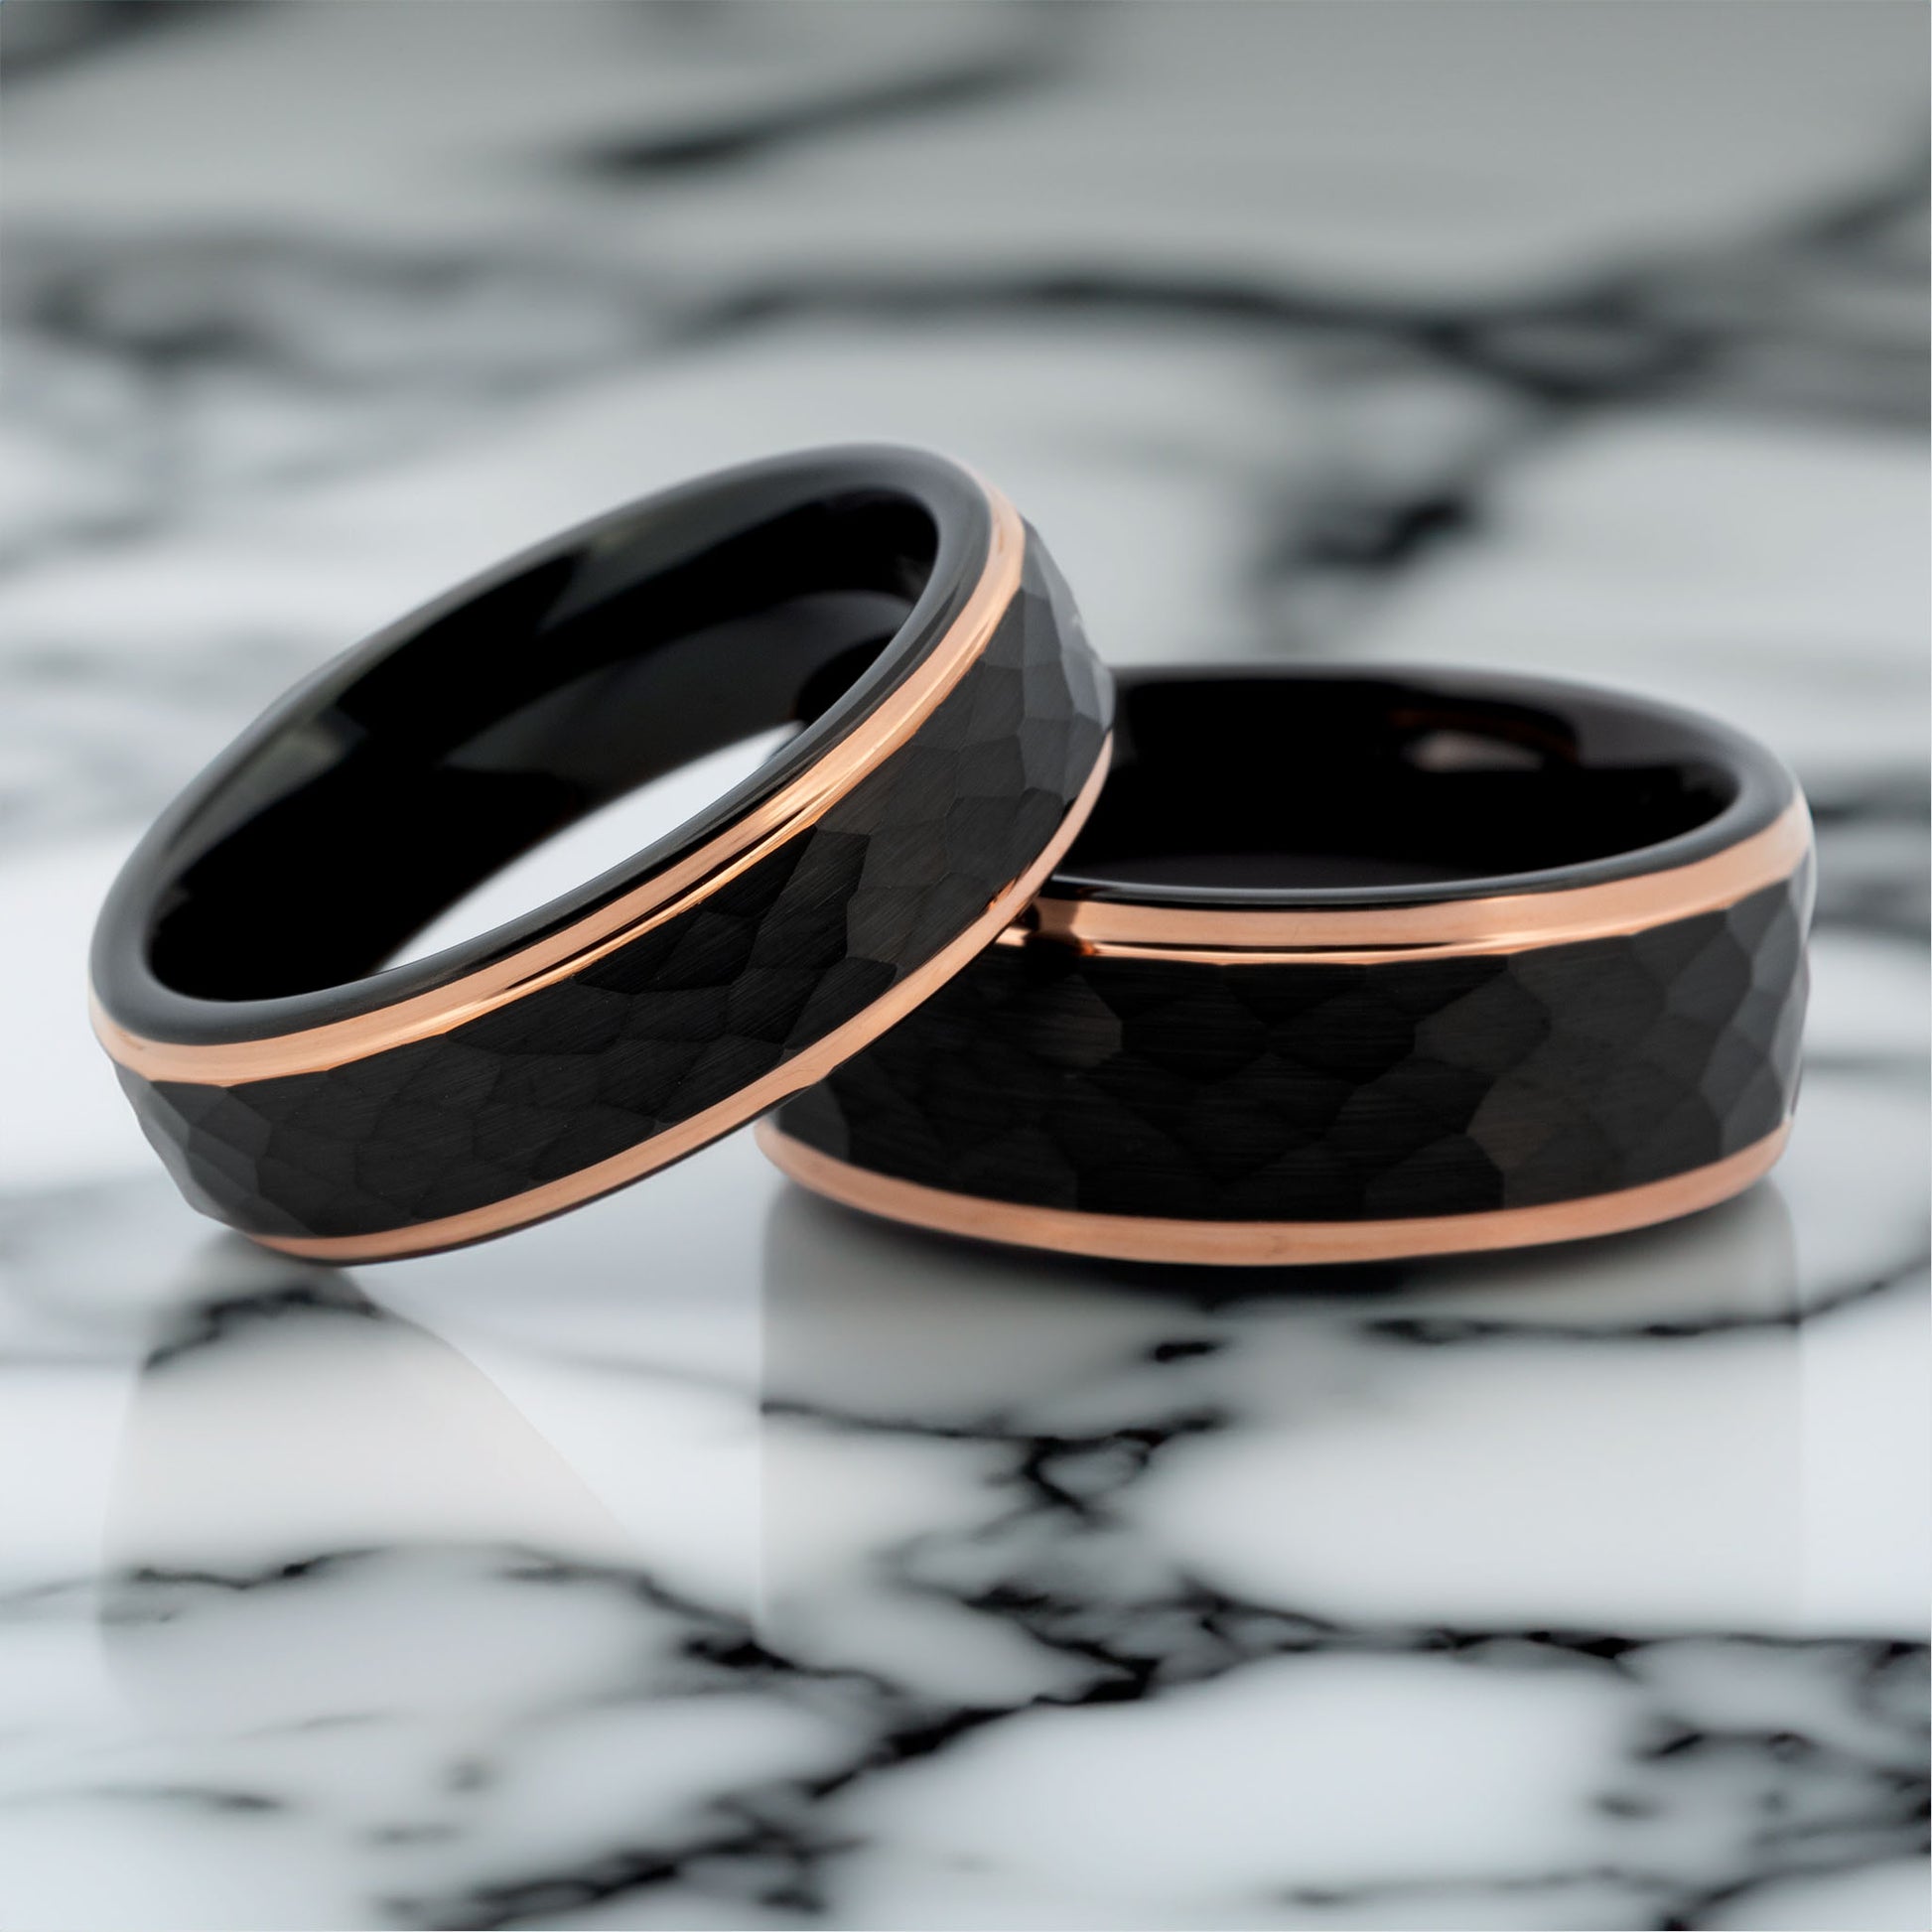 His and Hers Matching Gold Tone Tungsten Wedding Couple Rings Set